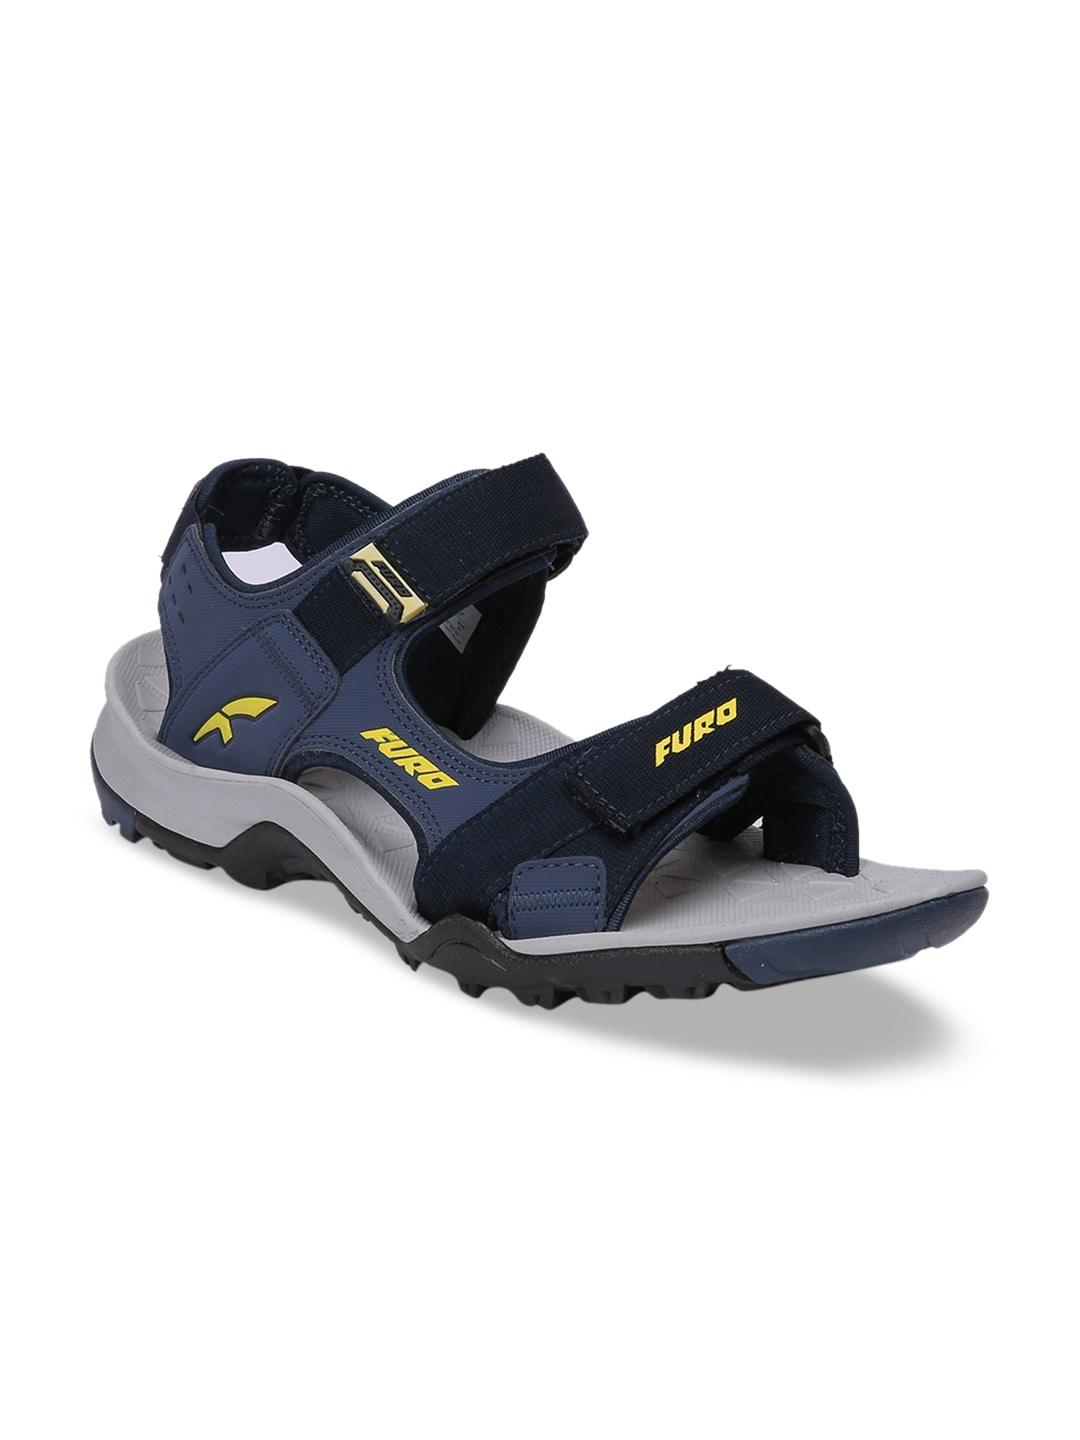 FURO by Red Chief Men Blue & Black Sports Sandals